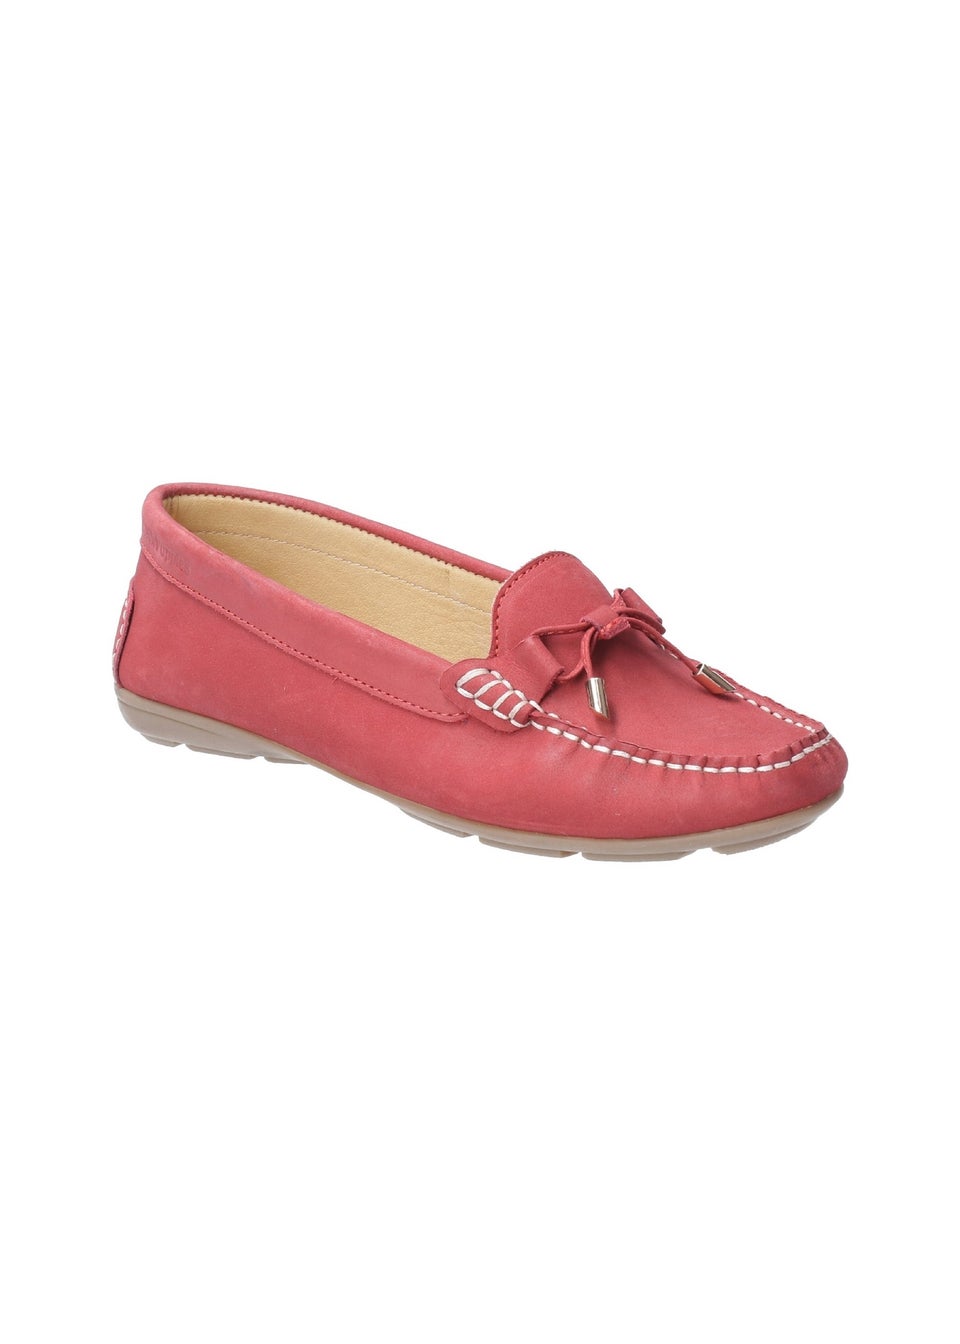 Hush Puppies Red Maggie Toggle Shoe